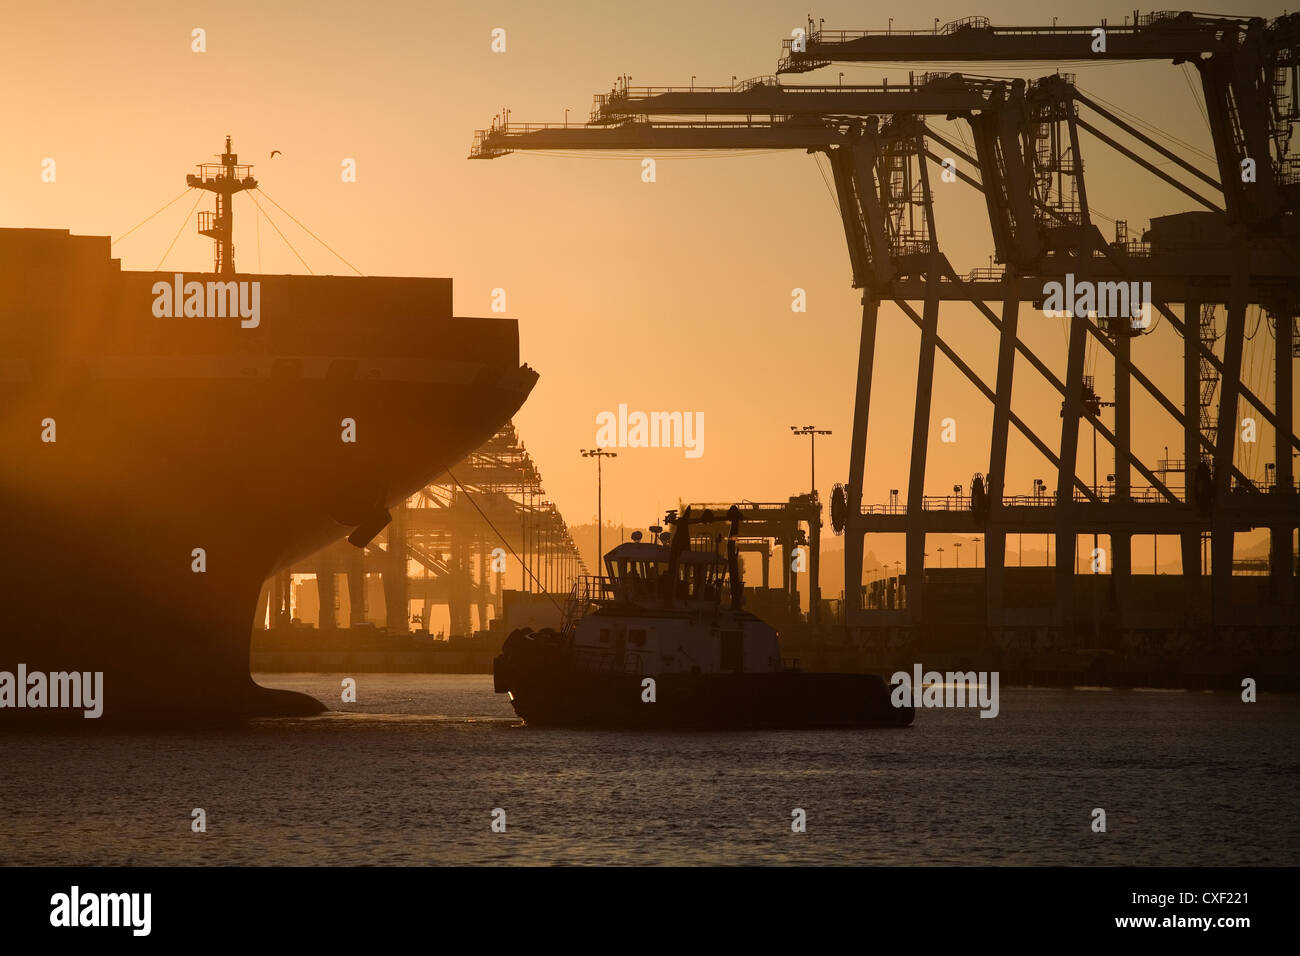 Tugboat and container ship of port of Oakland Stock Photo